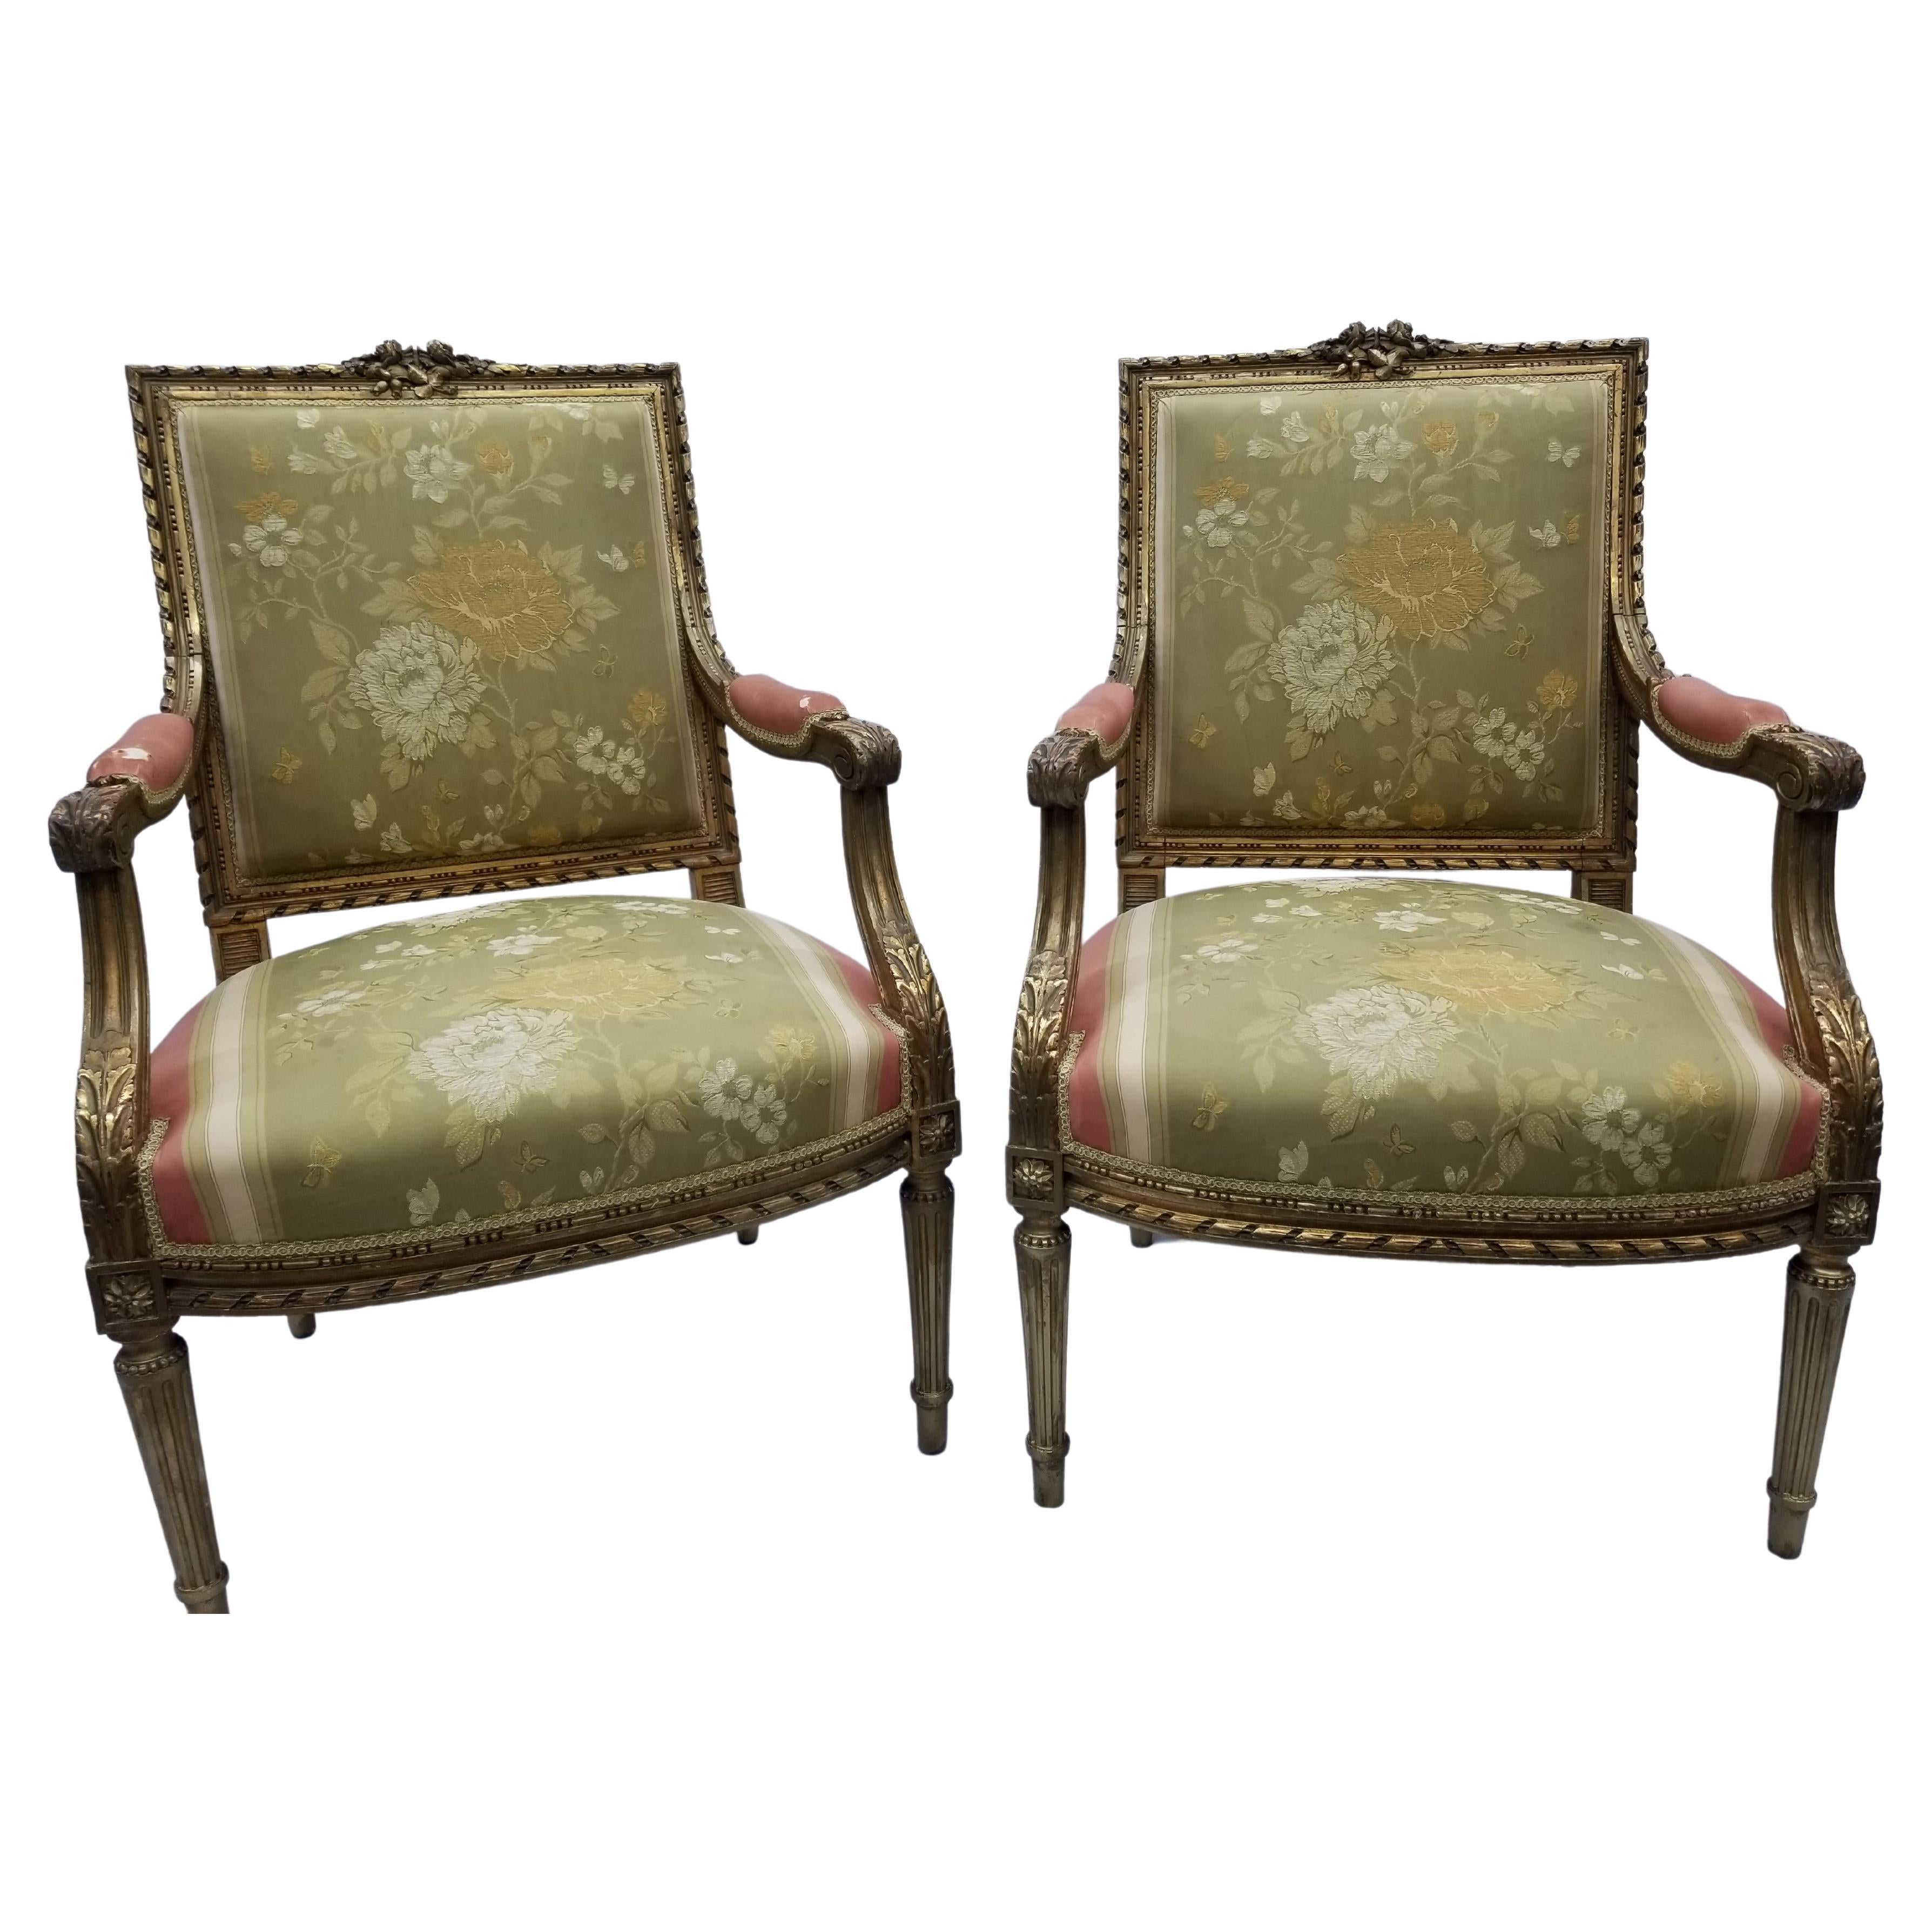 Set of 19th Century Louis XIV Giltwood Armchairs with Matching Footstools For Sale